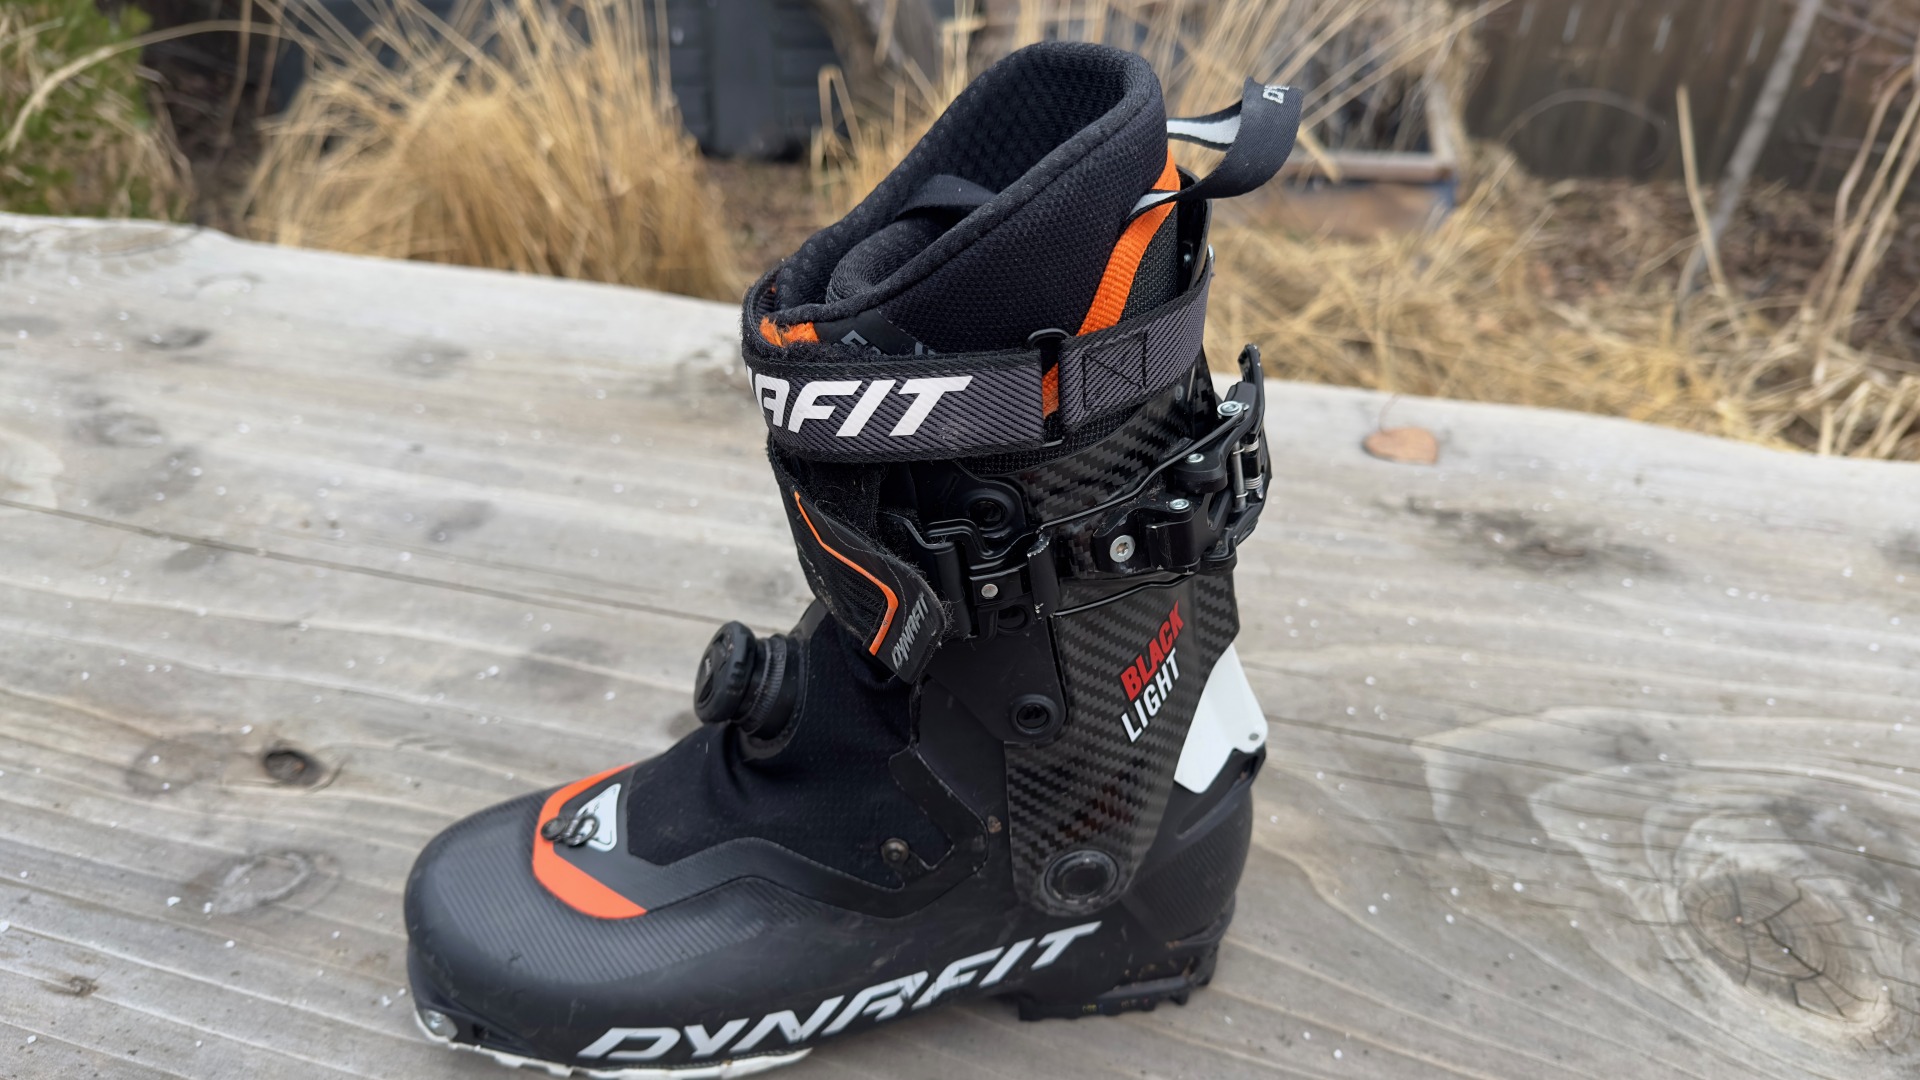 For the Love of Carbon: Dynafit’s Blacklight Ski Boot